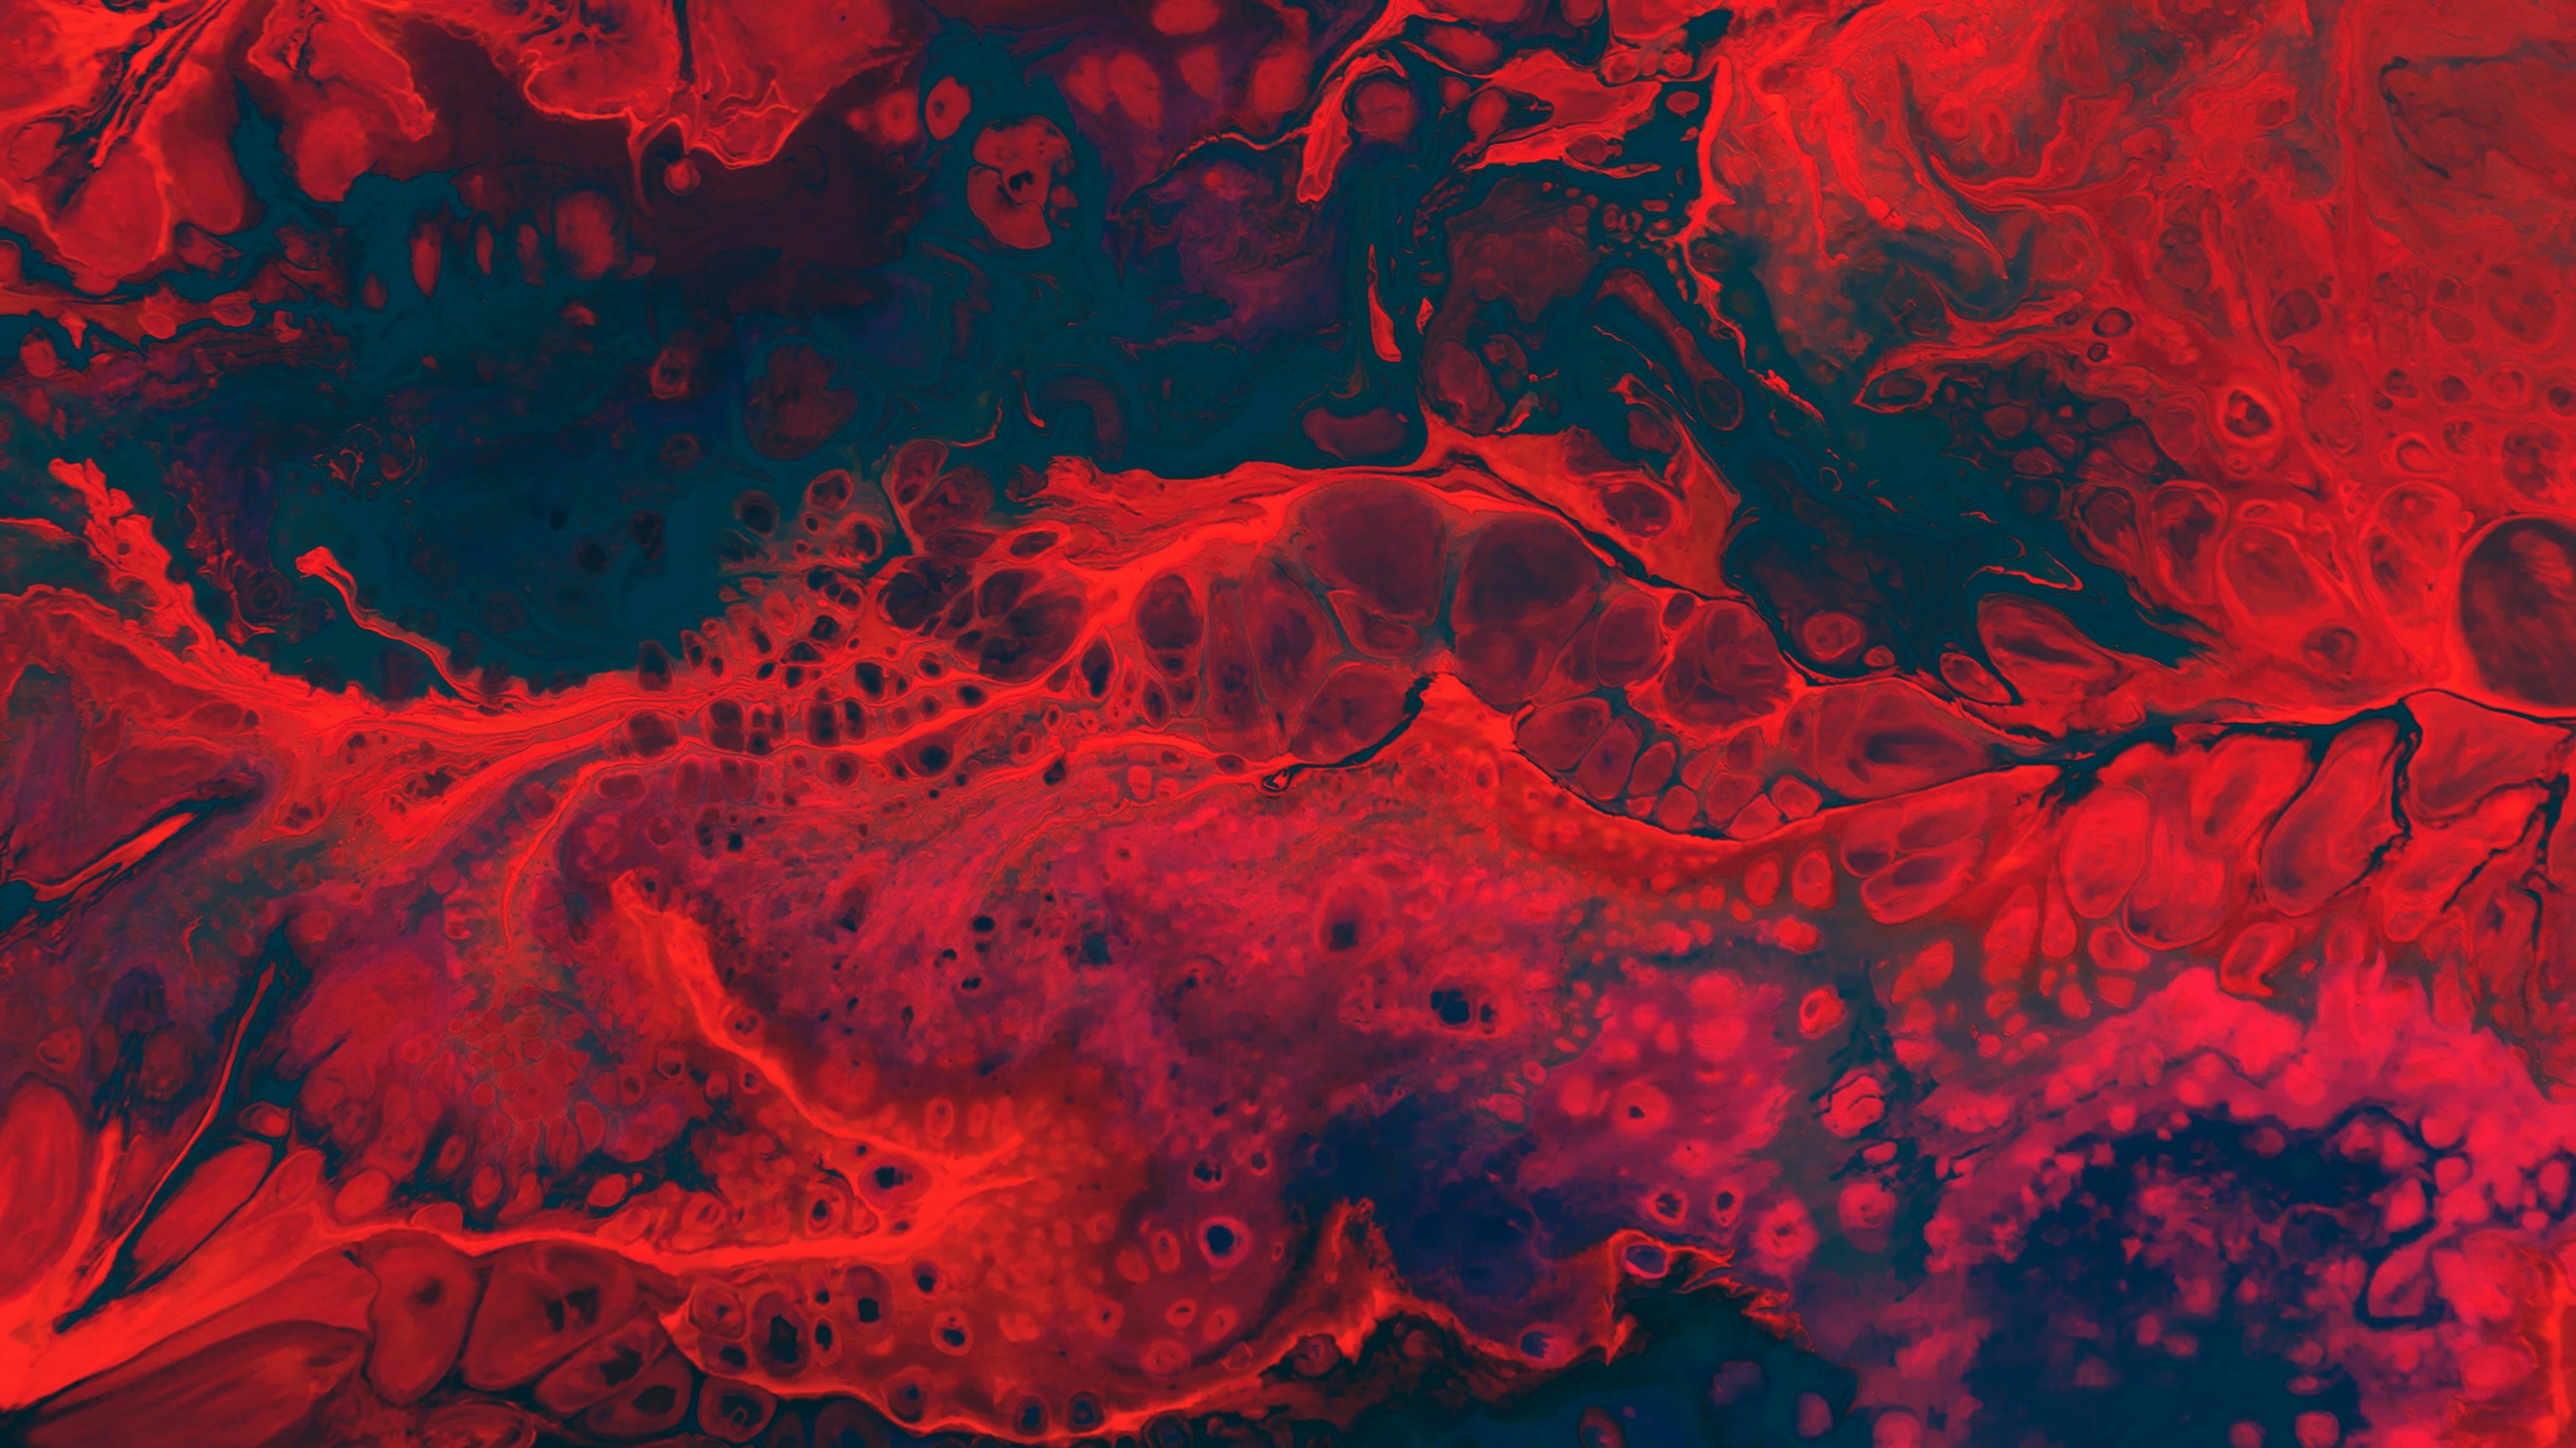 abstract art in red with cells